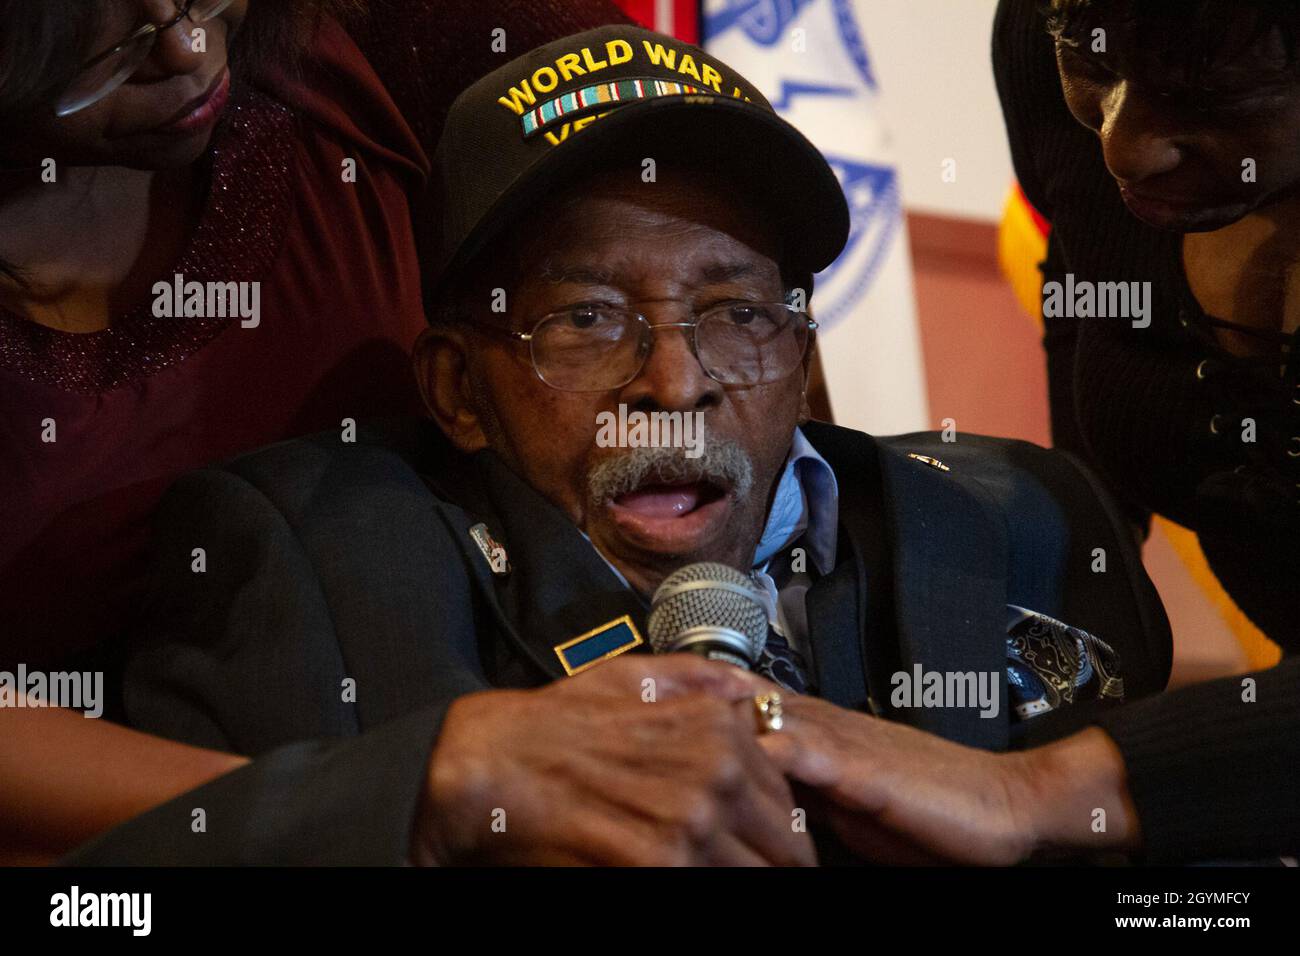 Pvt. Roosevelt Ruffin, a former Army Soldier who served with Company C, 614th Tank Destroyer Battalion, during World War II, addresses those in attendance at his 100th birthday celebration Feb. 1, 2020, in Virginia Beach, Virginia. Ruffin was one of the very first African-American tank destroyer unit members of the war. (U.S. Army Reserve photo by Sgt. 1st Class Javier Orona) Stock Photo